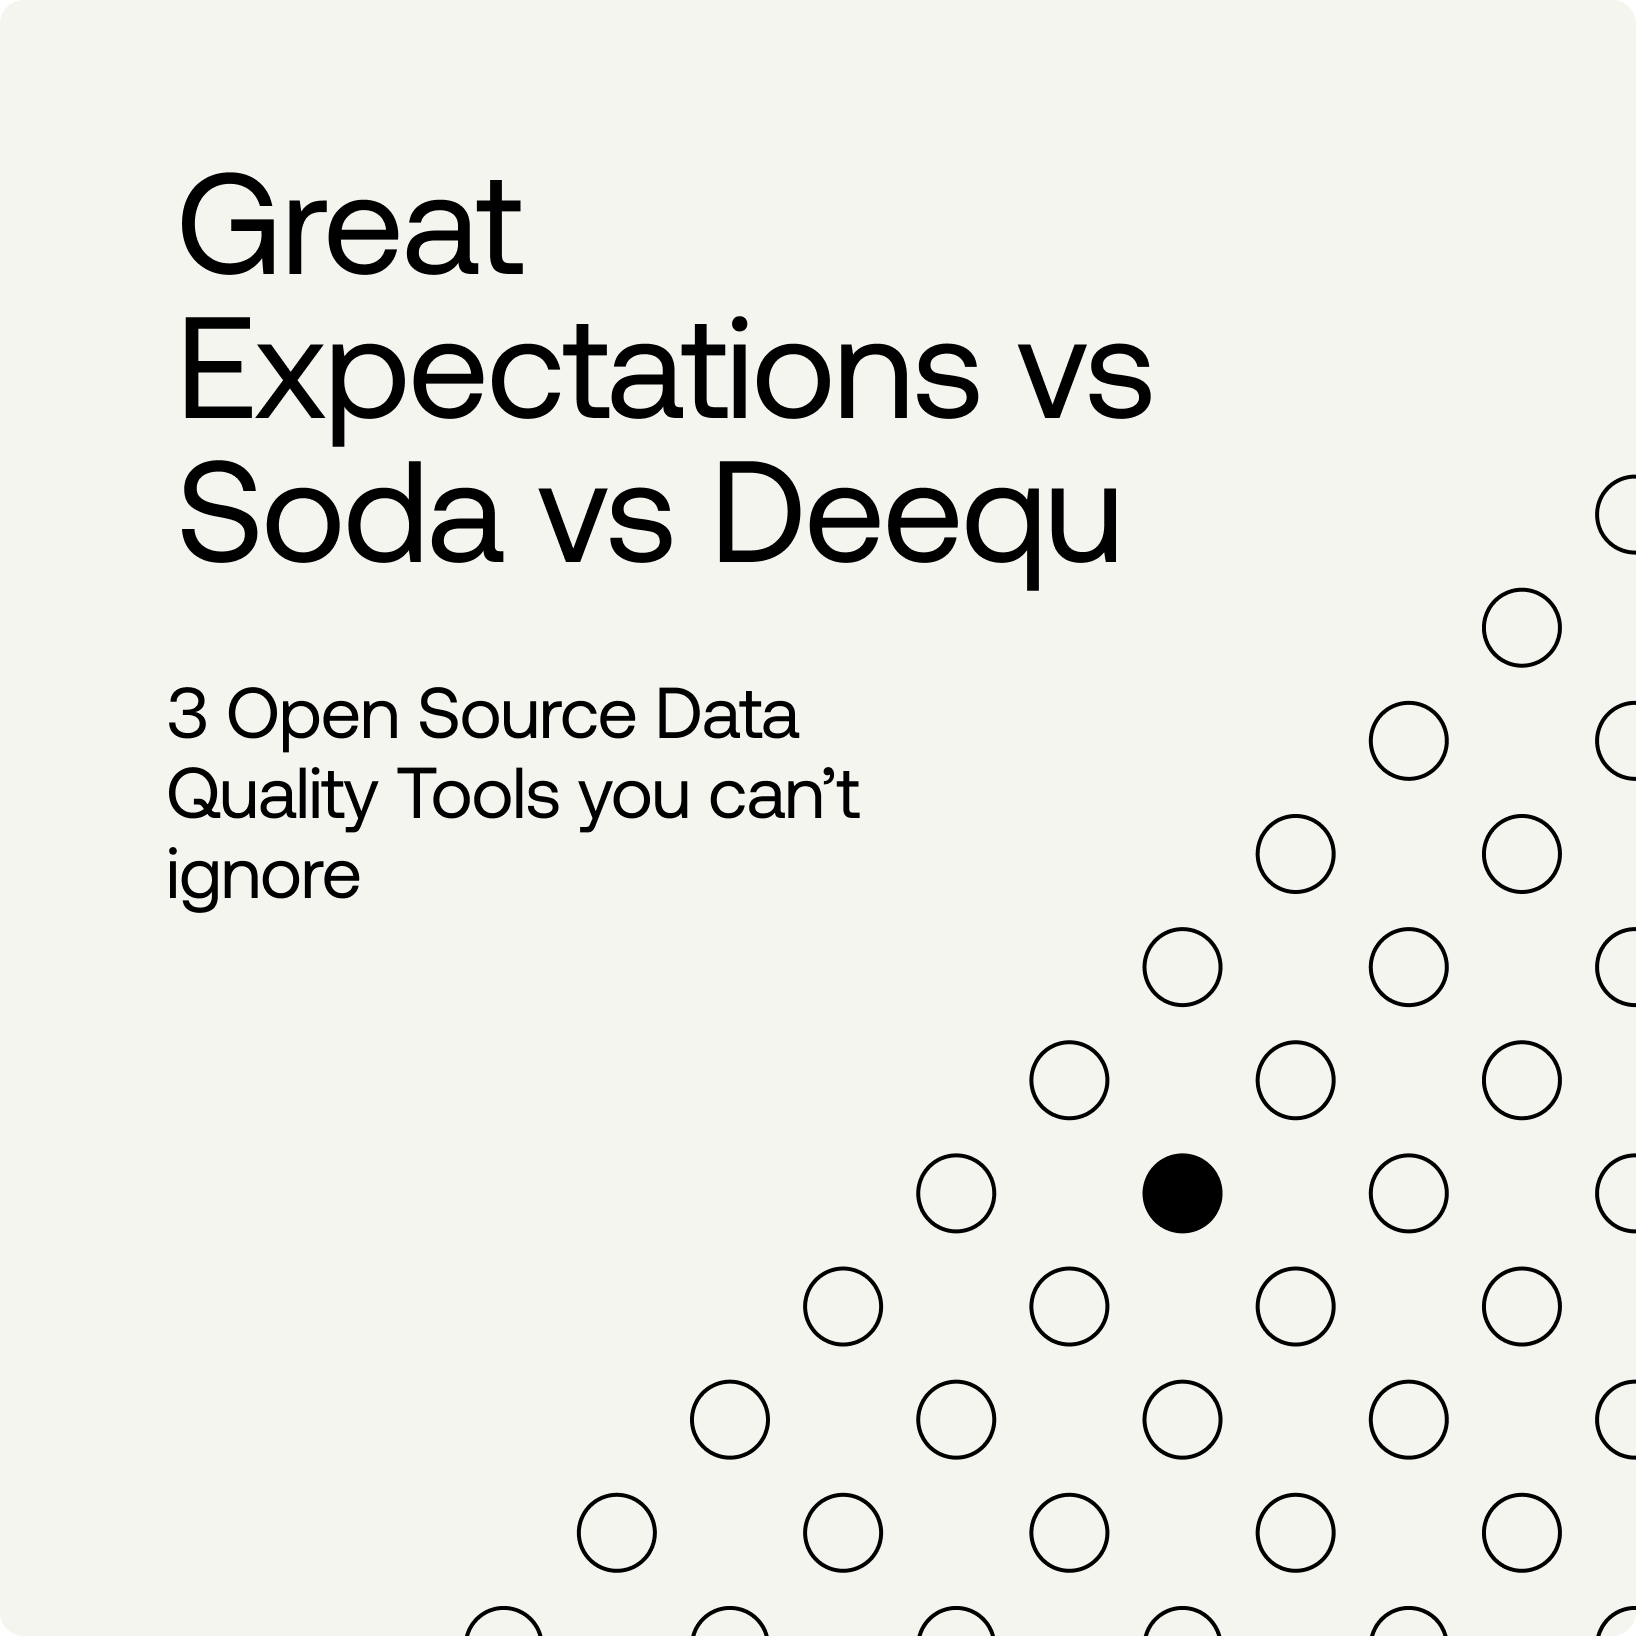 3 open source data quality tools you can't ignore: Great Expectations vs. Soda vs. Deequ